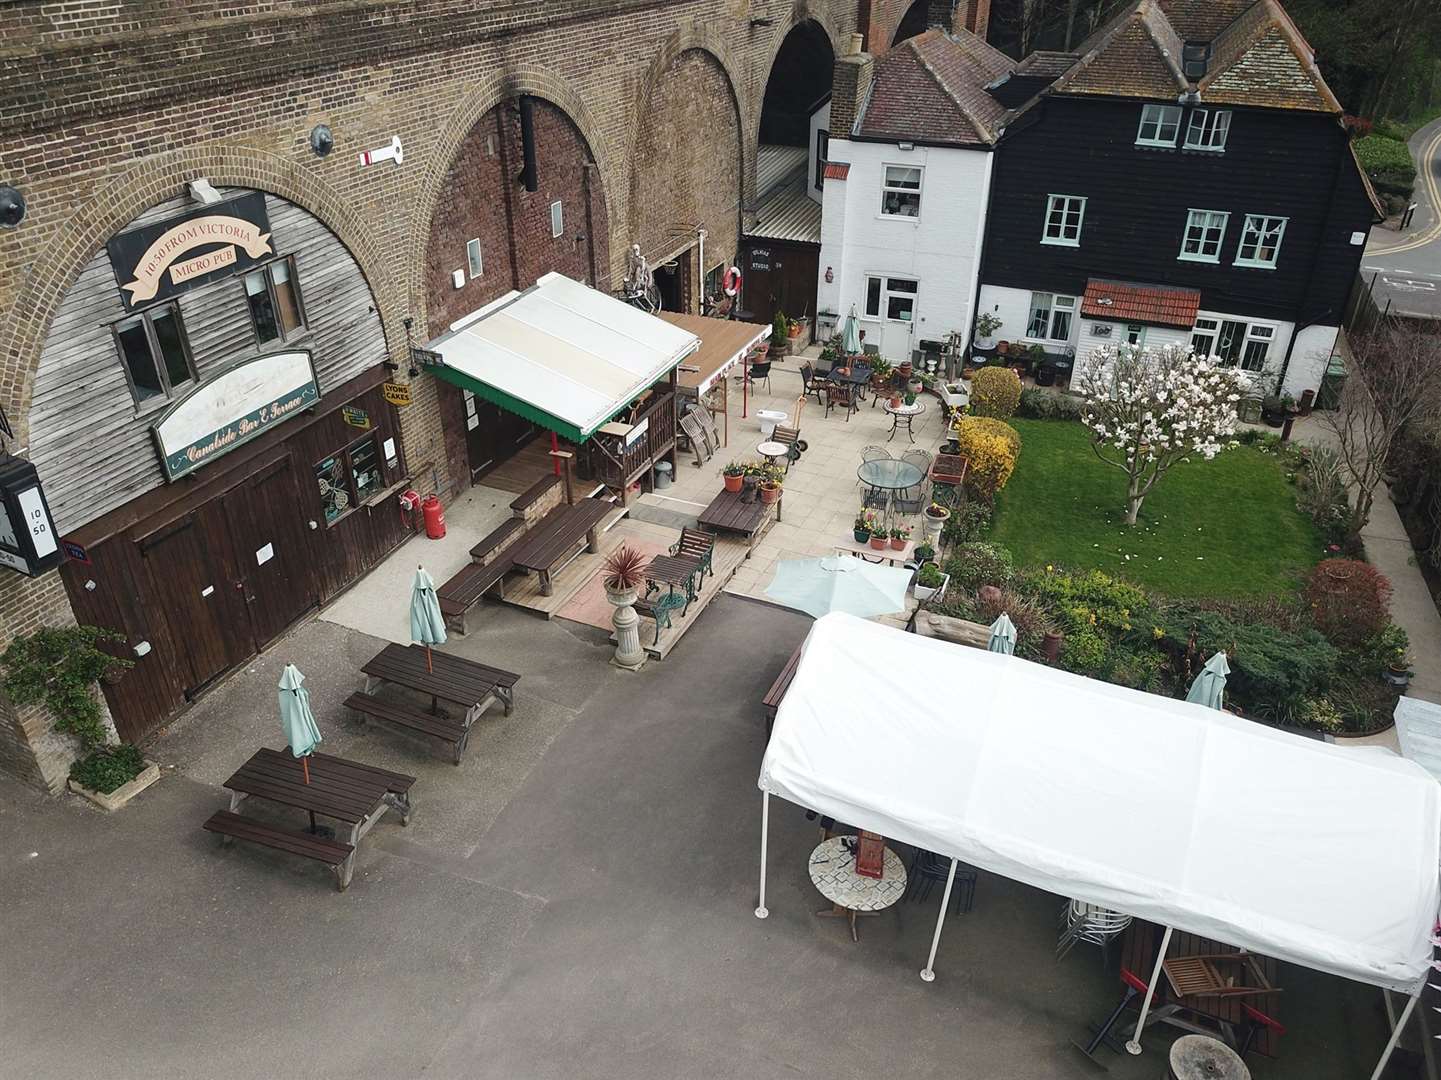 The large beer garden is popular in the summer months